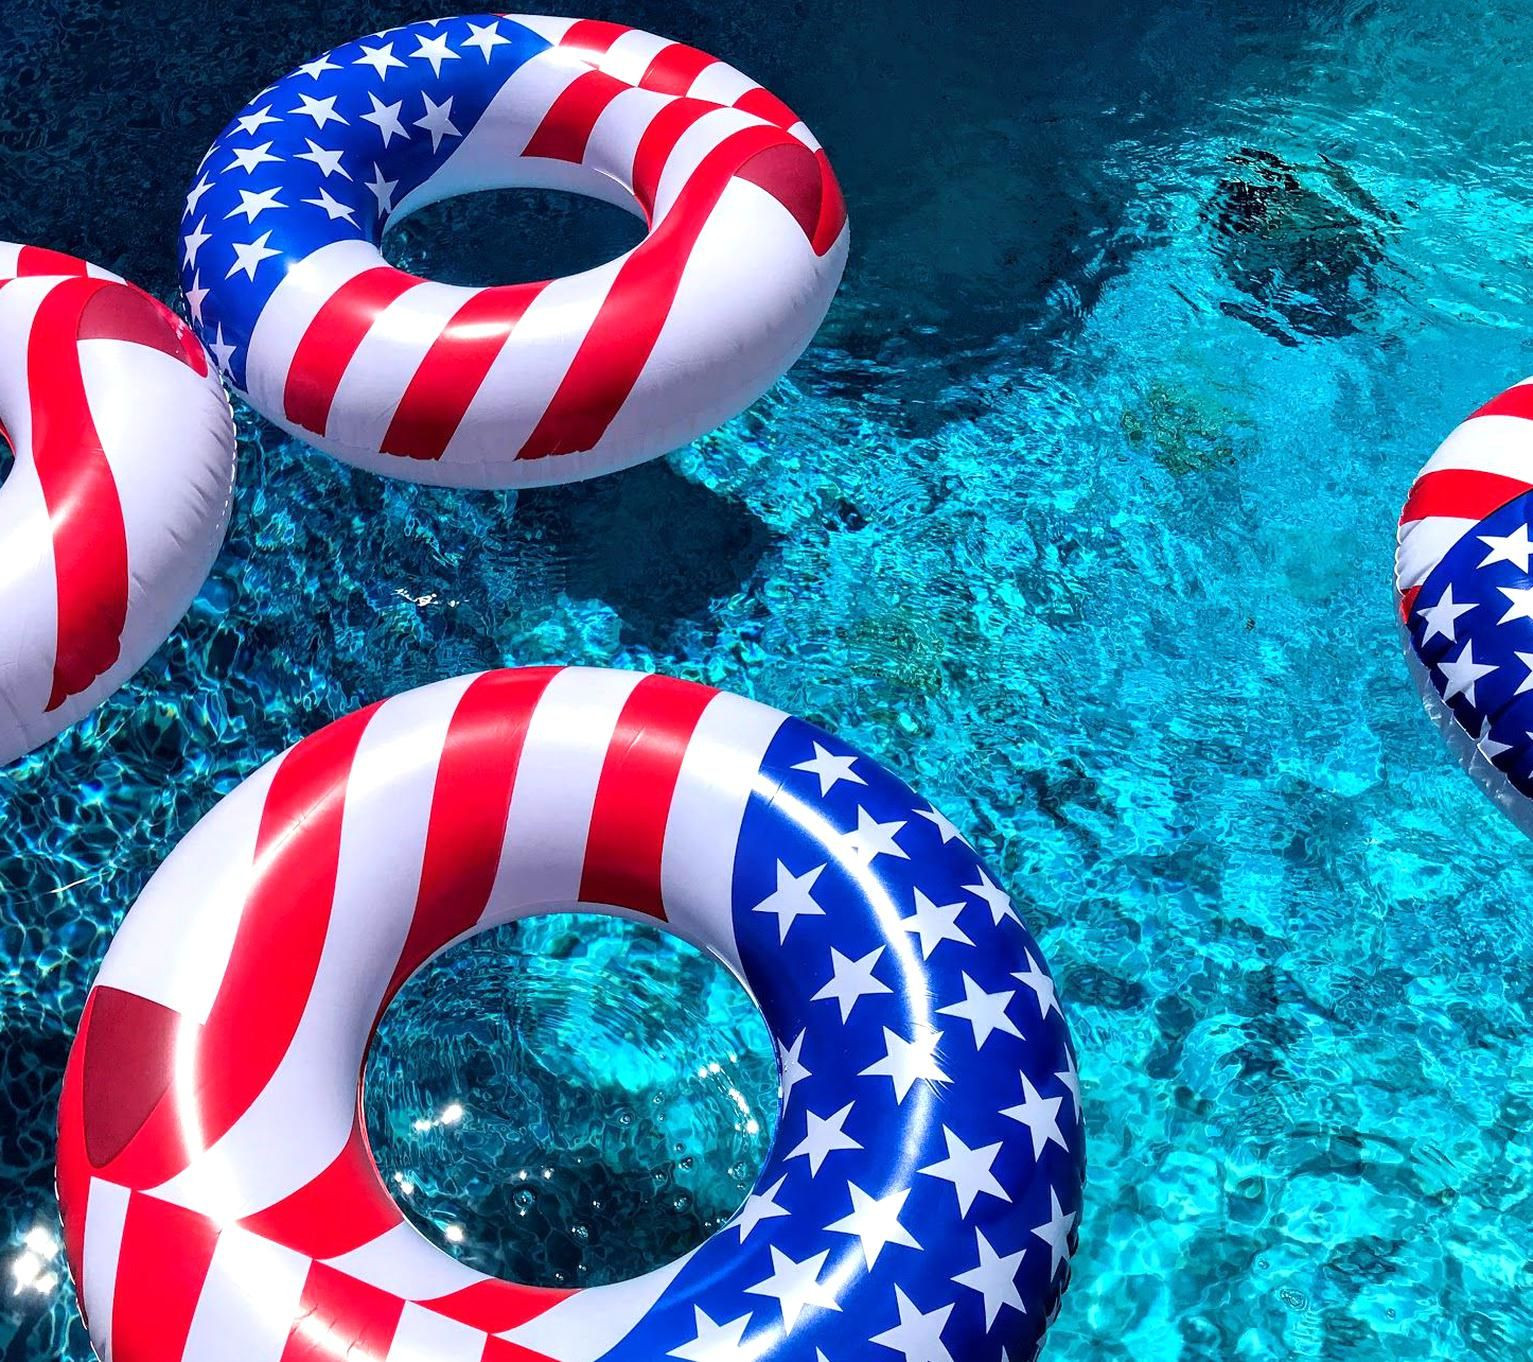 4Th Of July Pool Party Ideas
 4th of July pool party planning starts with red white and